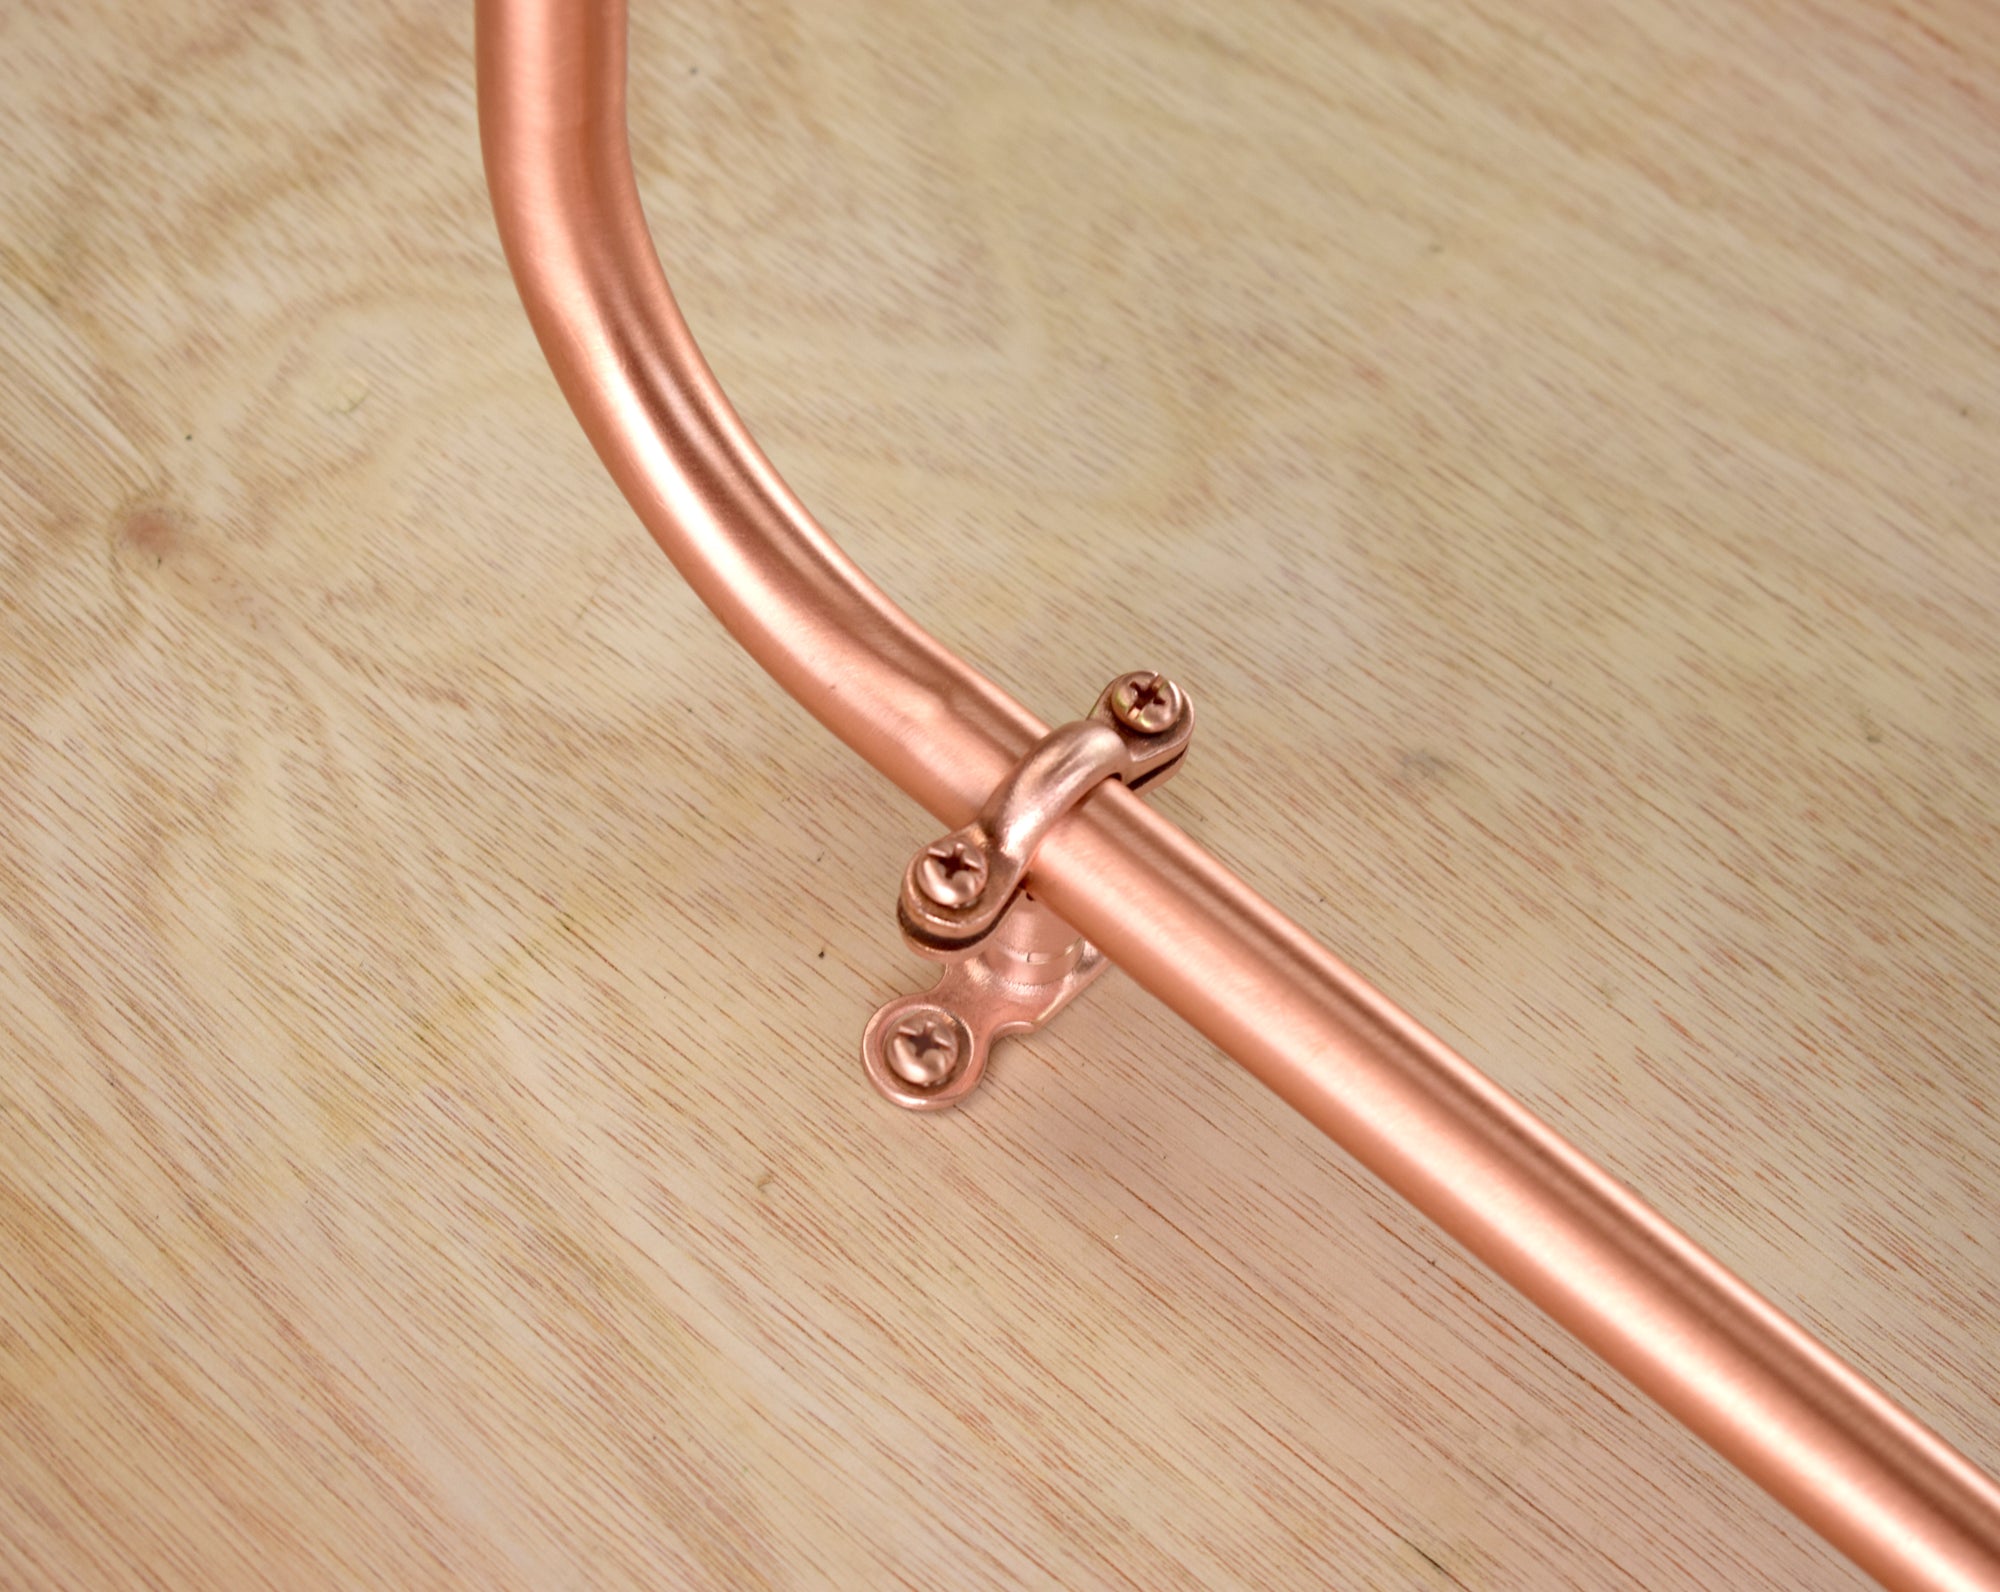 curved copper shower spout on a swimming pool or bathroom shower design